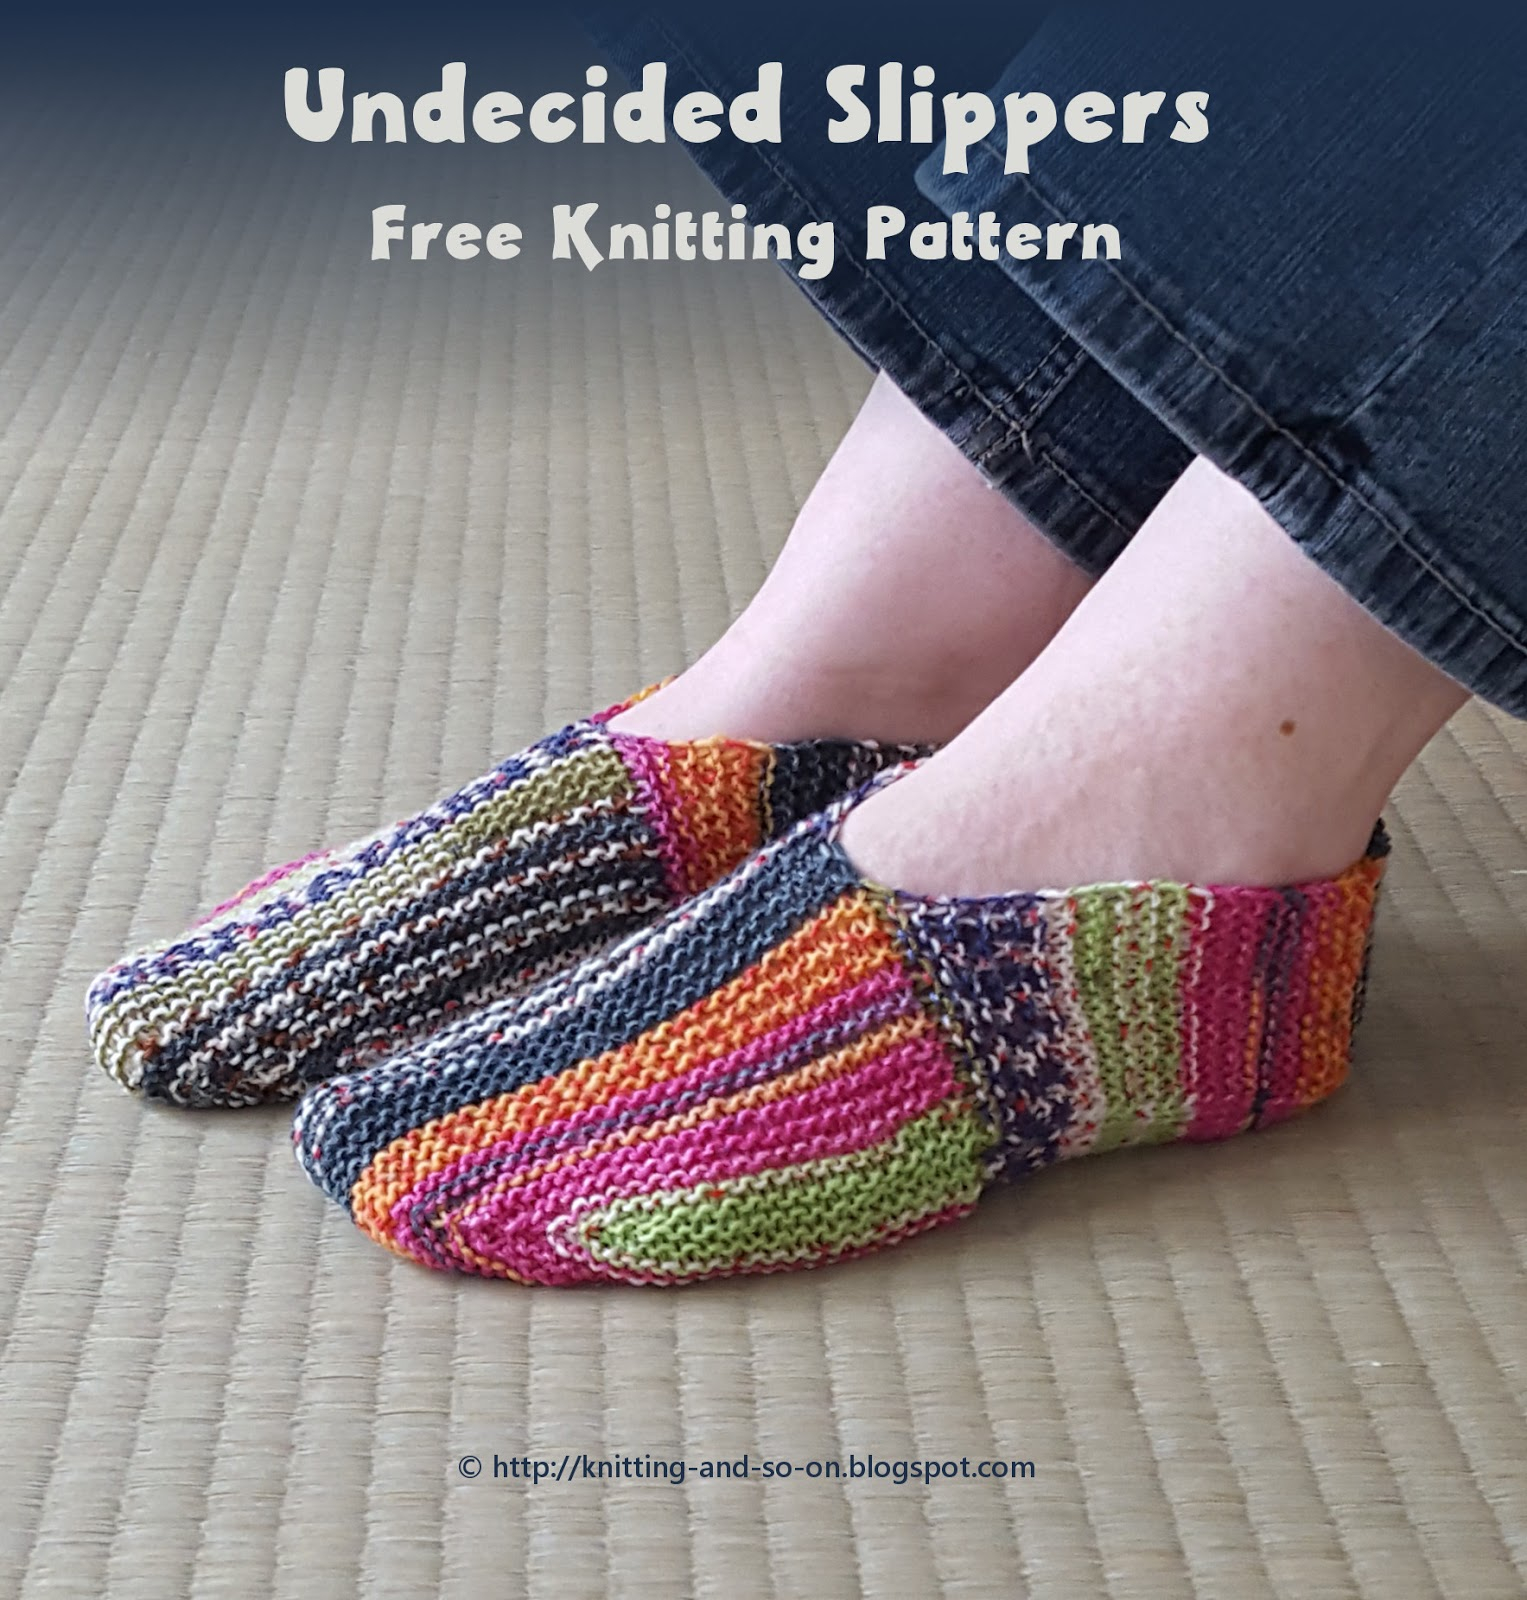 Free Patterns For Knitted Slippers Knitting And So On Undecided Slippers